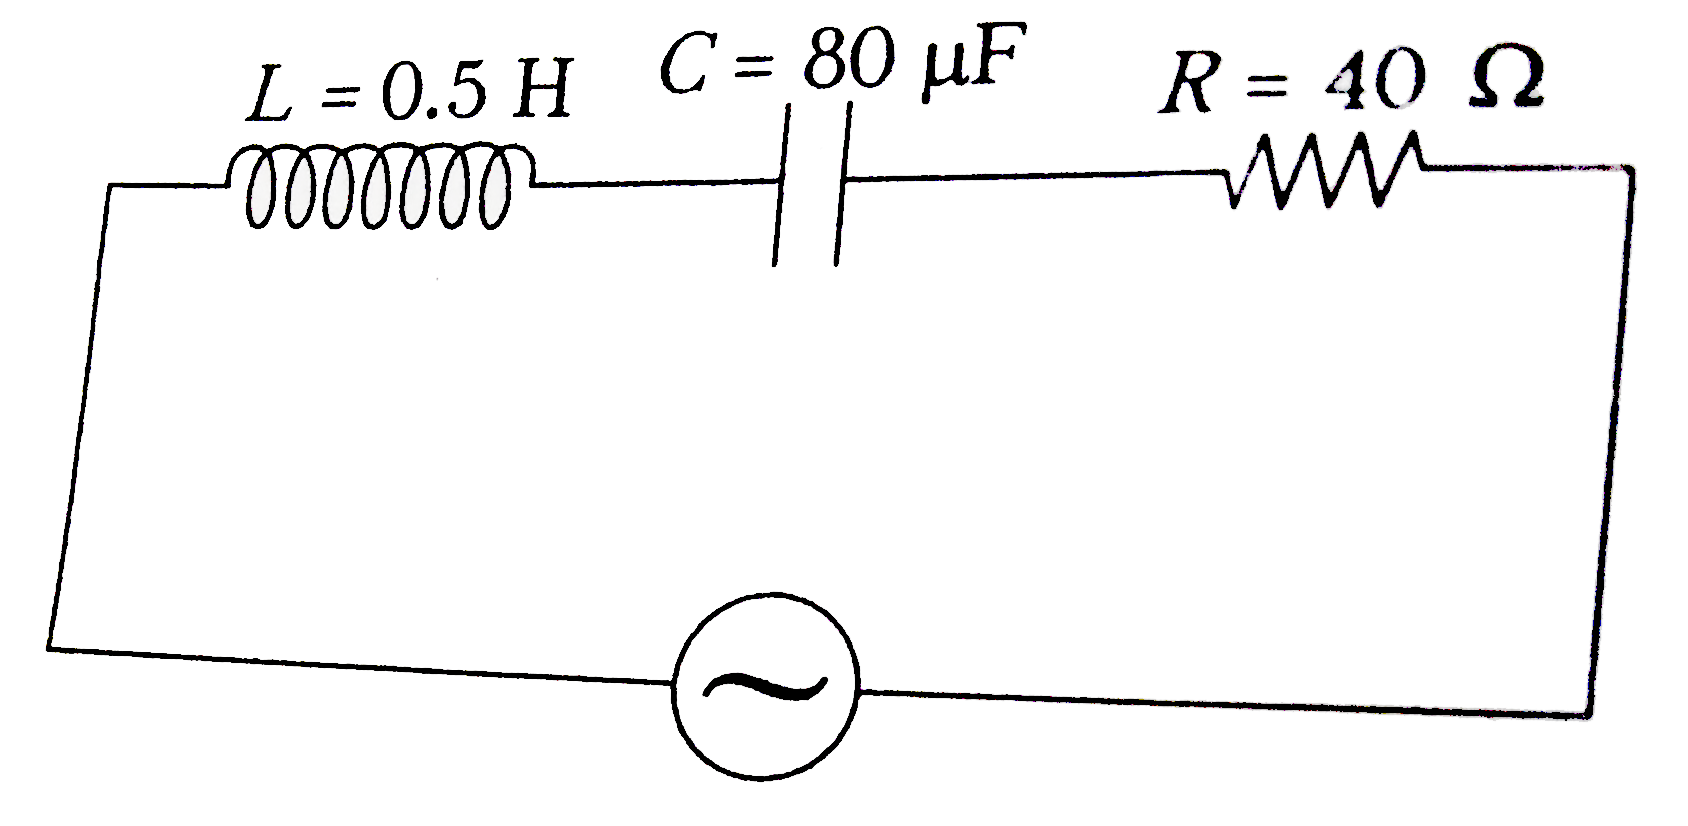 In the given figure , a series L-C-R circuit is connected to a variable frequency source of 230 V . The impedance and amplitude of the current at the resonating frequency will be